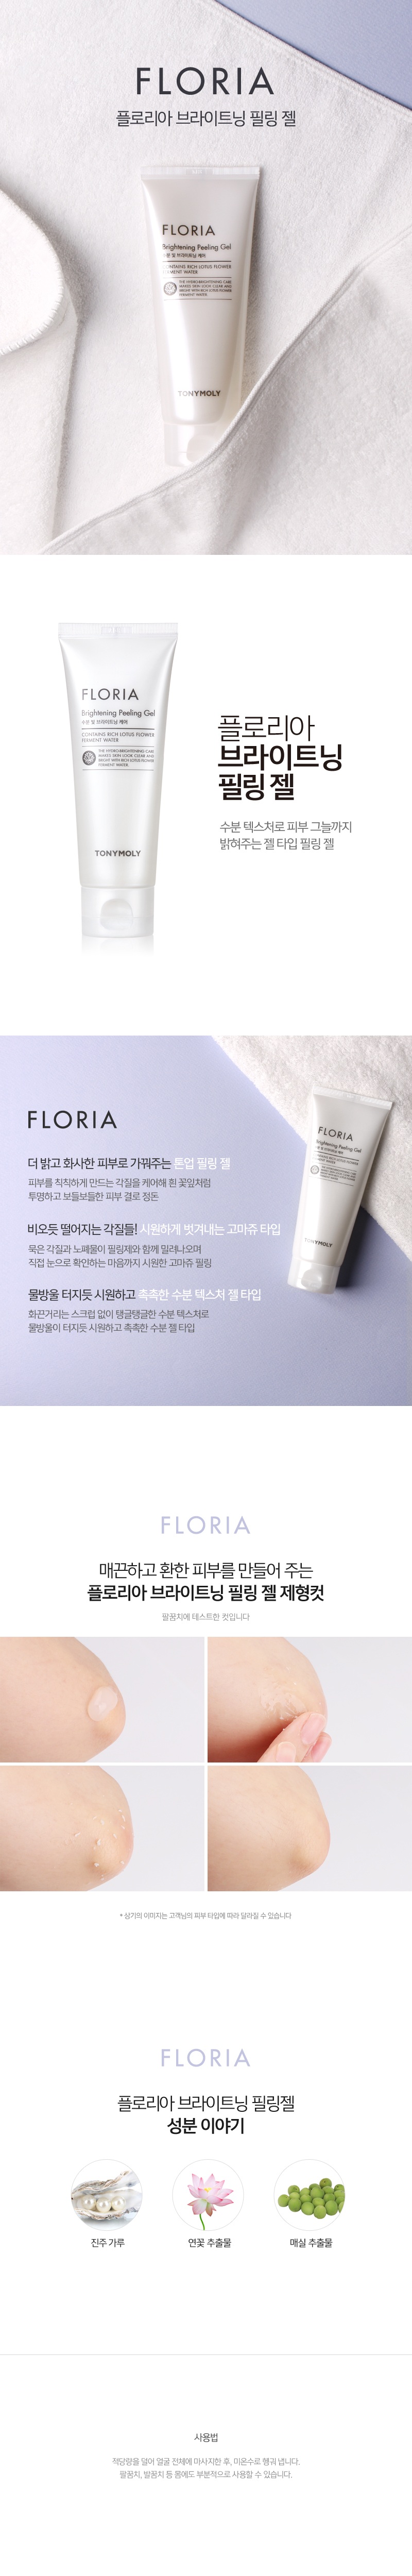 Tony Moly Floria Brightening Peeling Gel korean cleanser product online shop malaysia china thailand1